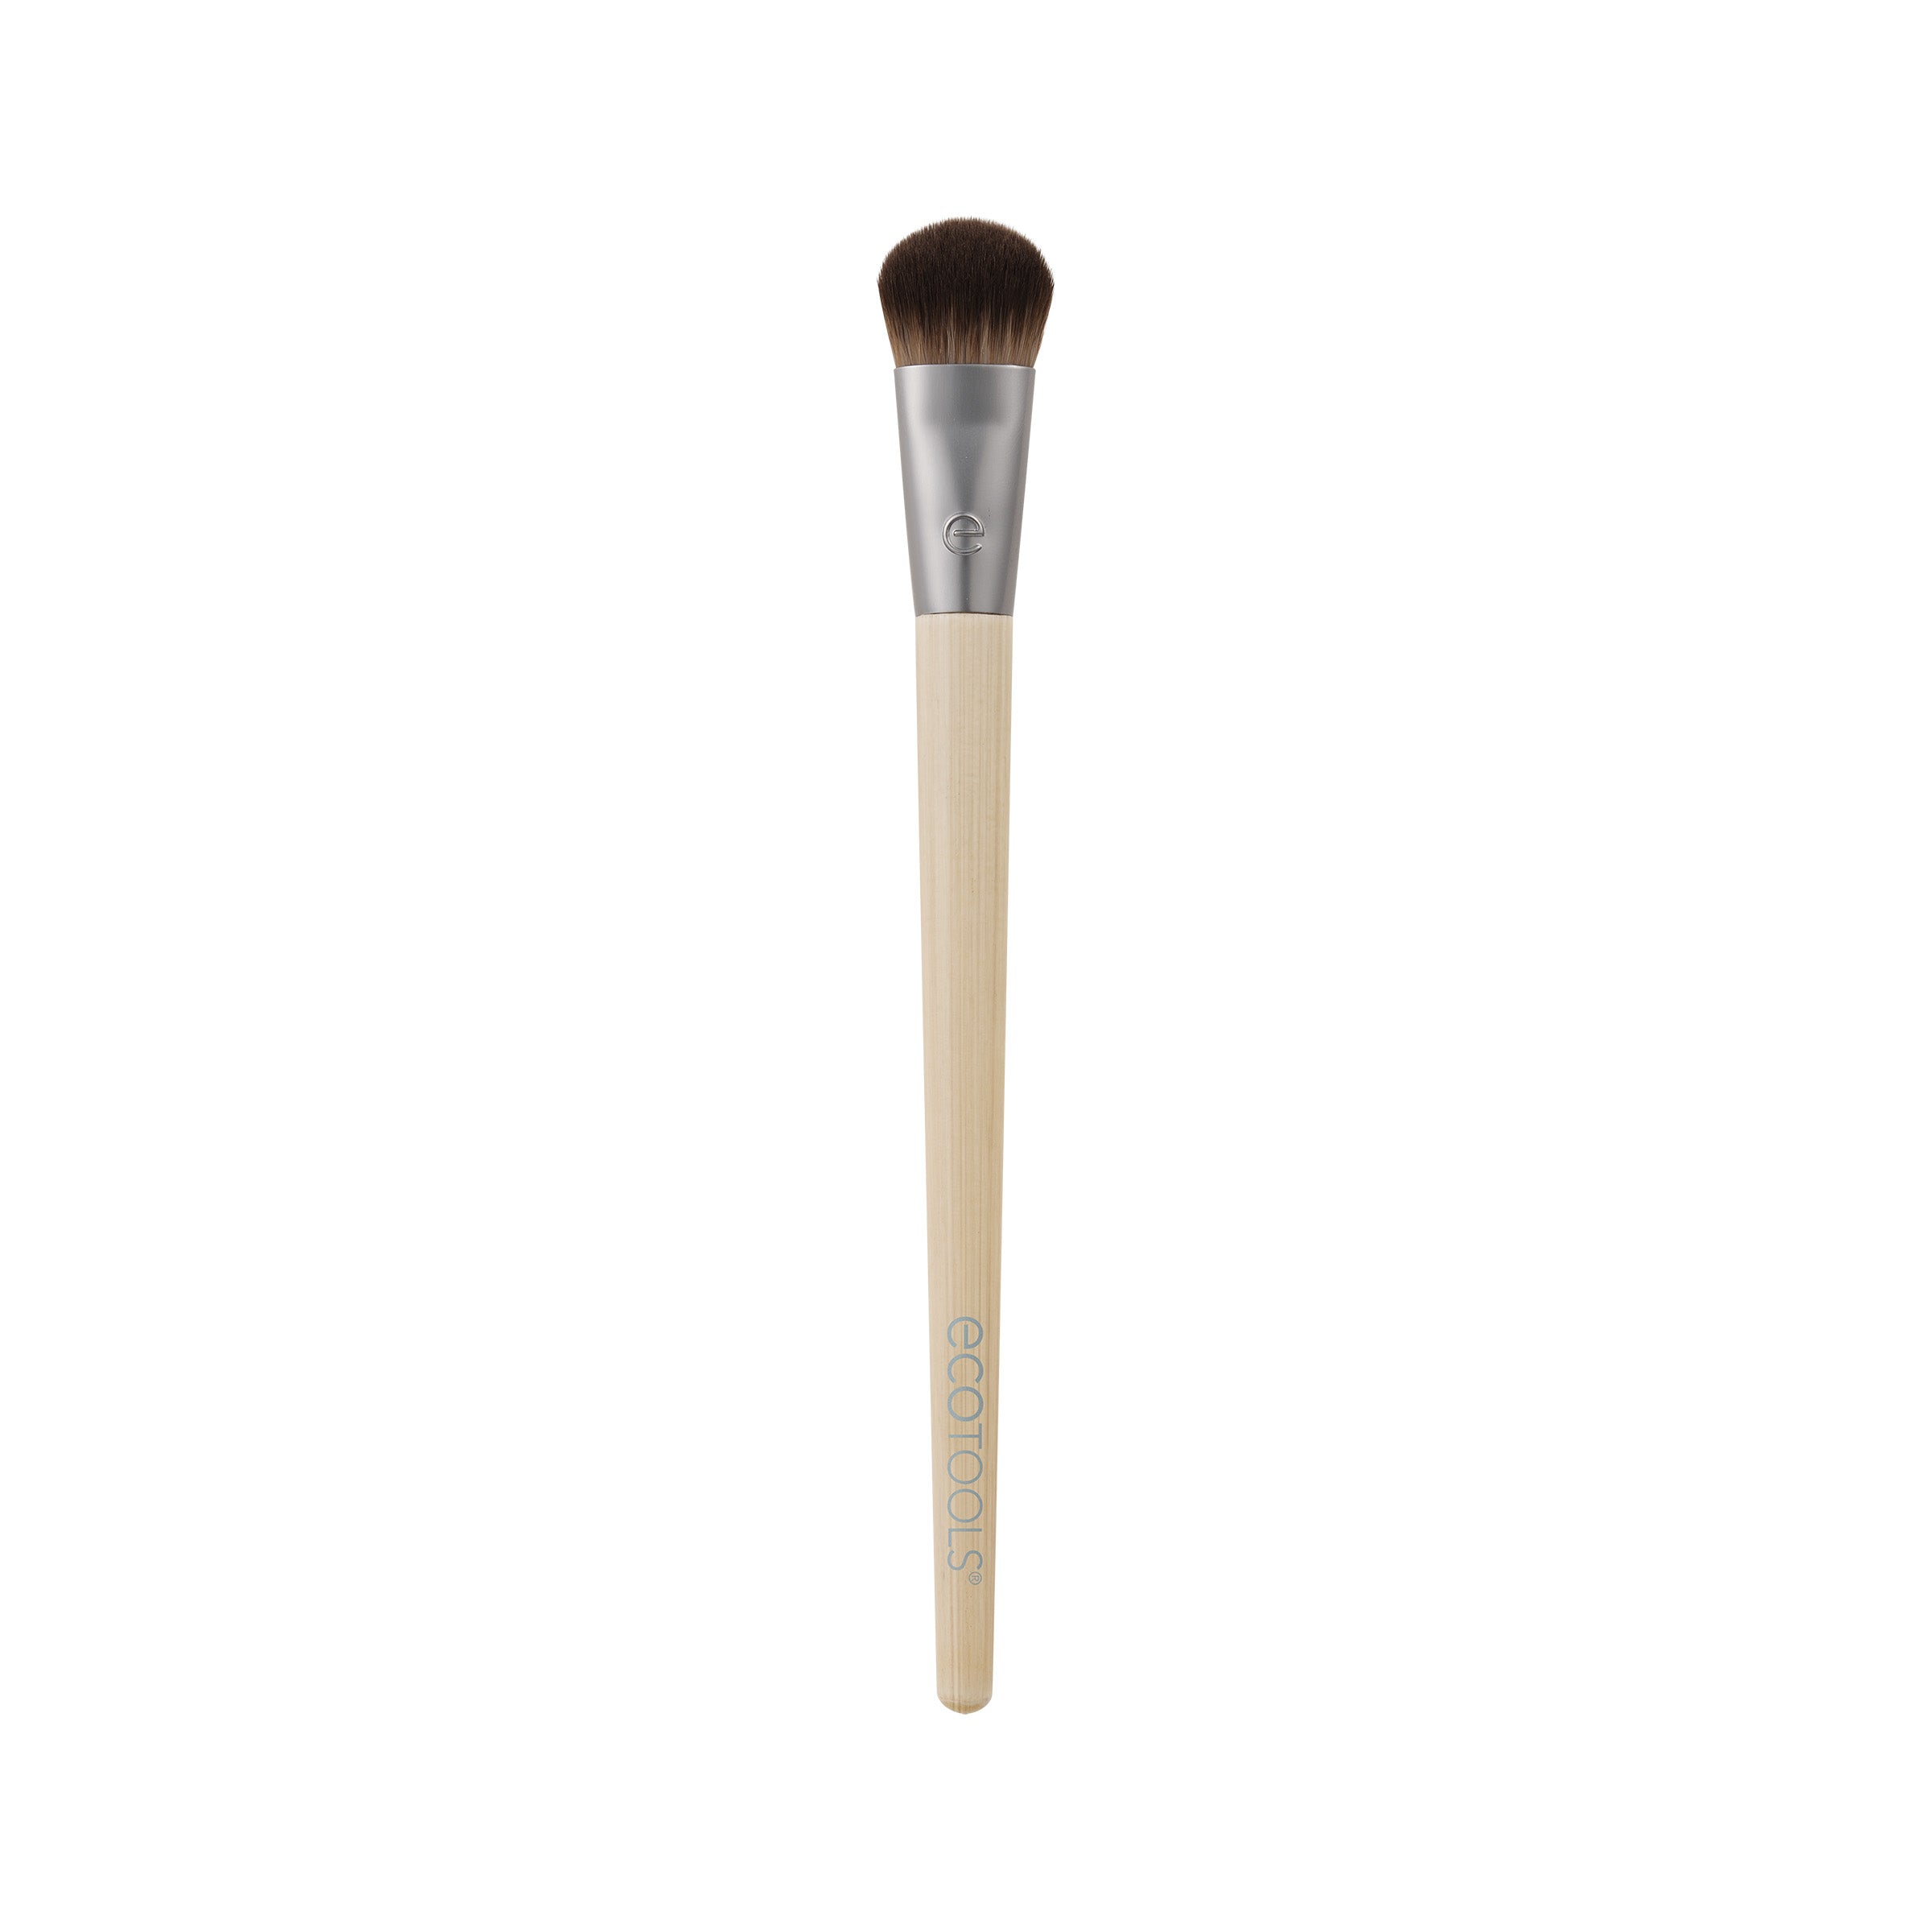 e.l.f. Small Stipple Brush Makeup Brush For Creating A Smooth & Natural  Airbrushed Finish Great For Foundation & Concealer Vegan & Cruelty-Free